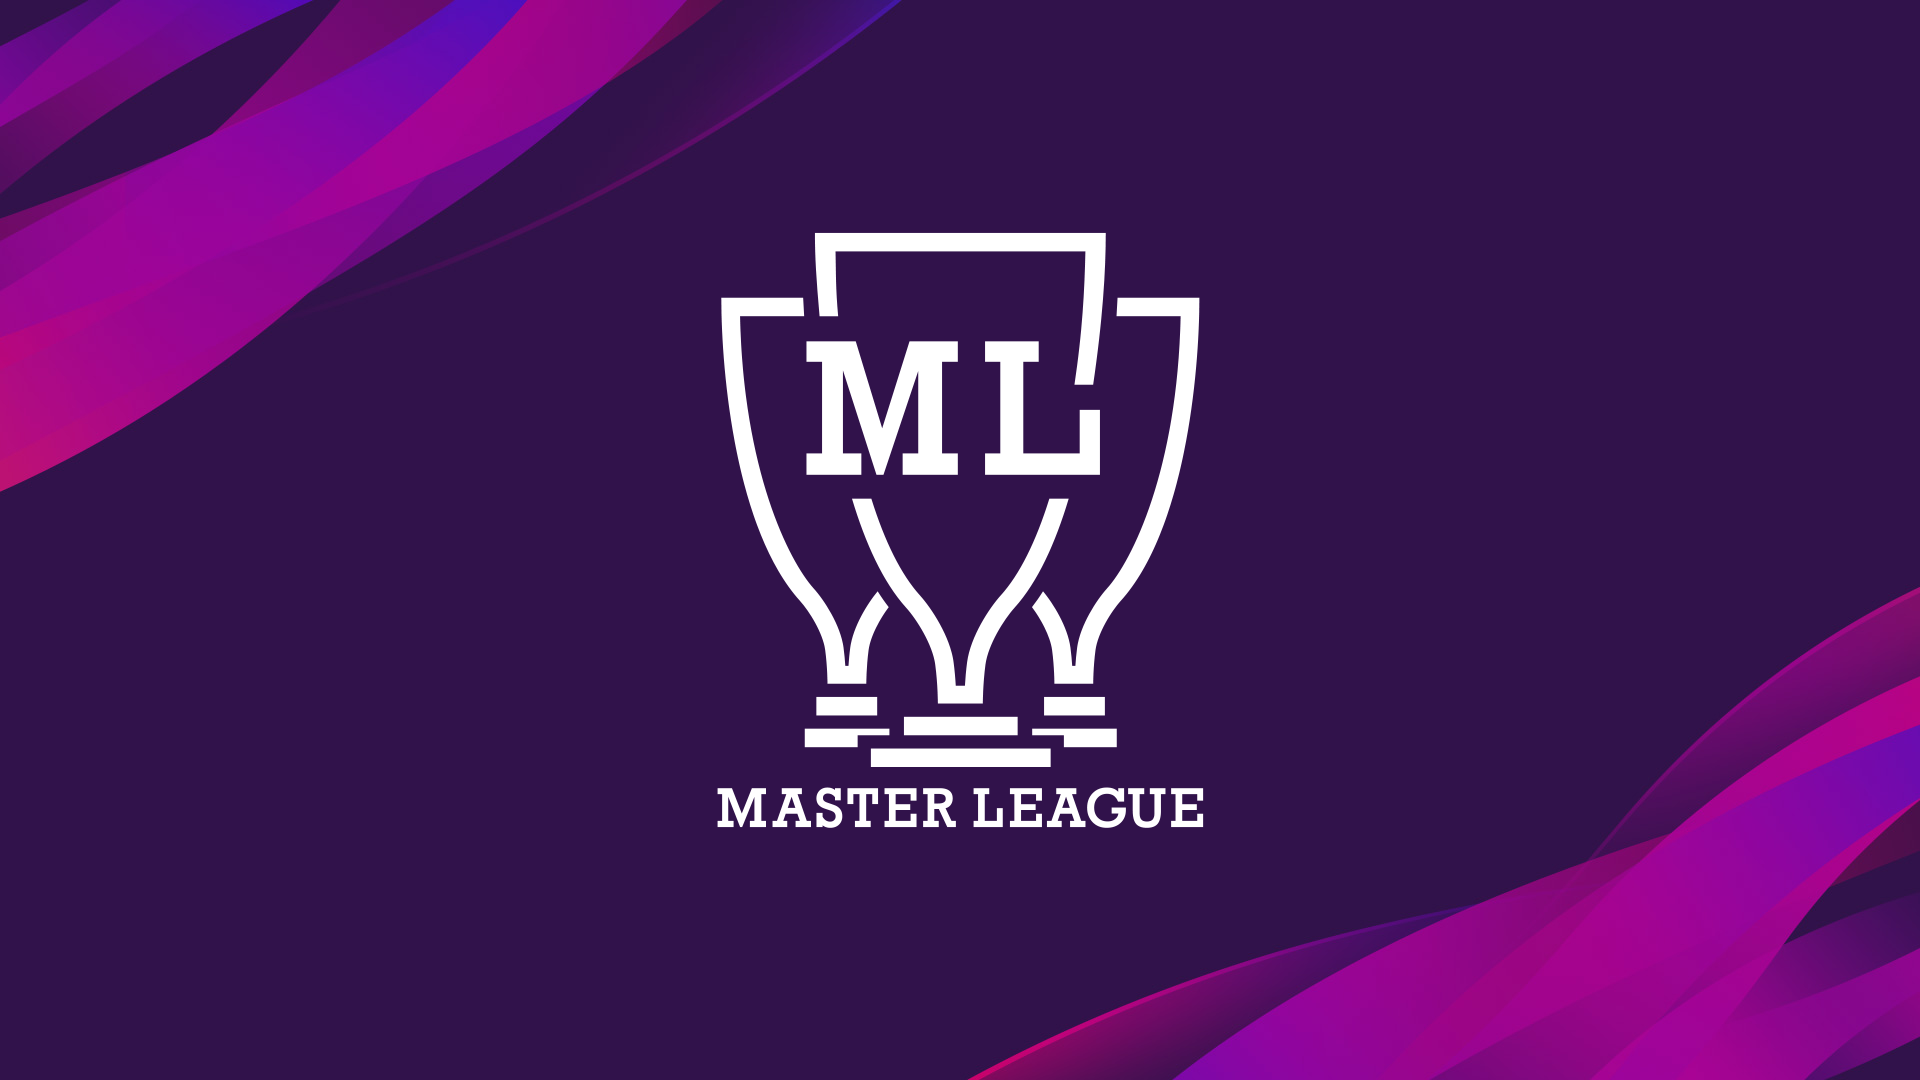 Won in Master League